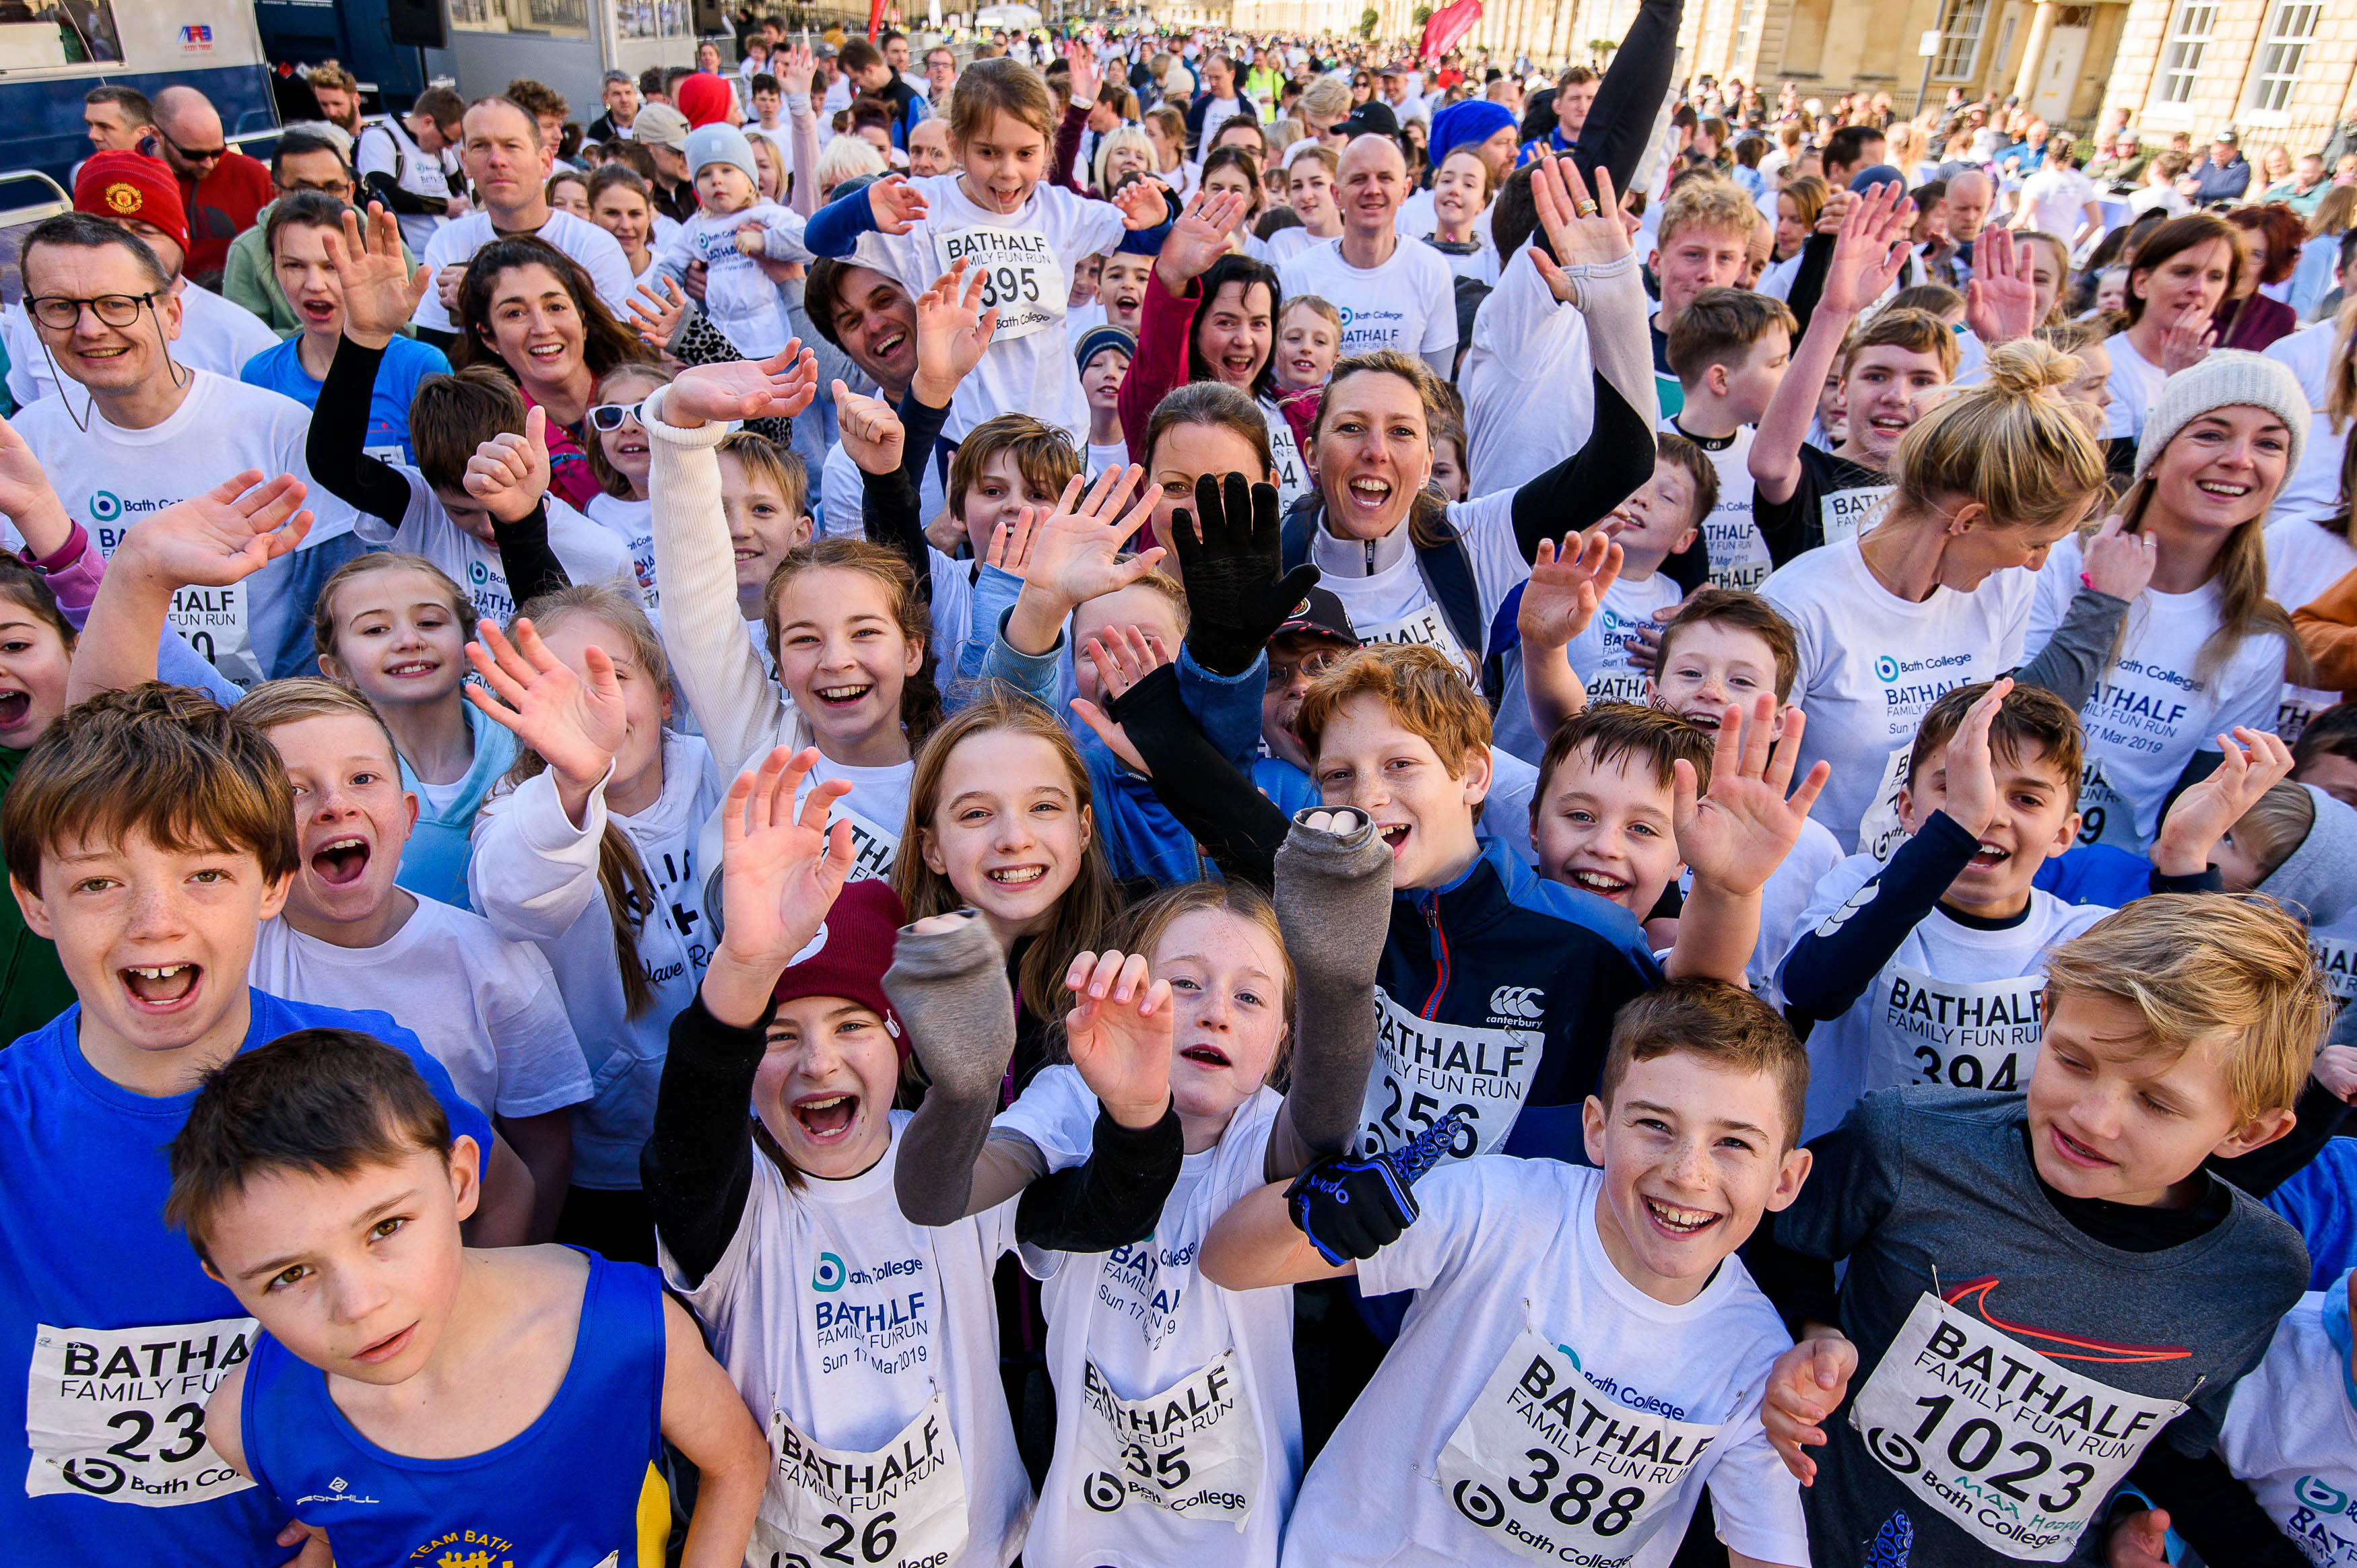 BATH COLLEGE CONFIRMS ONGOING SUPPORT FOR THE BATH HALF MARATHON